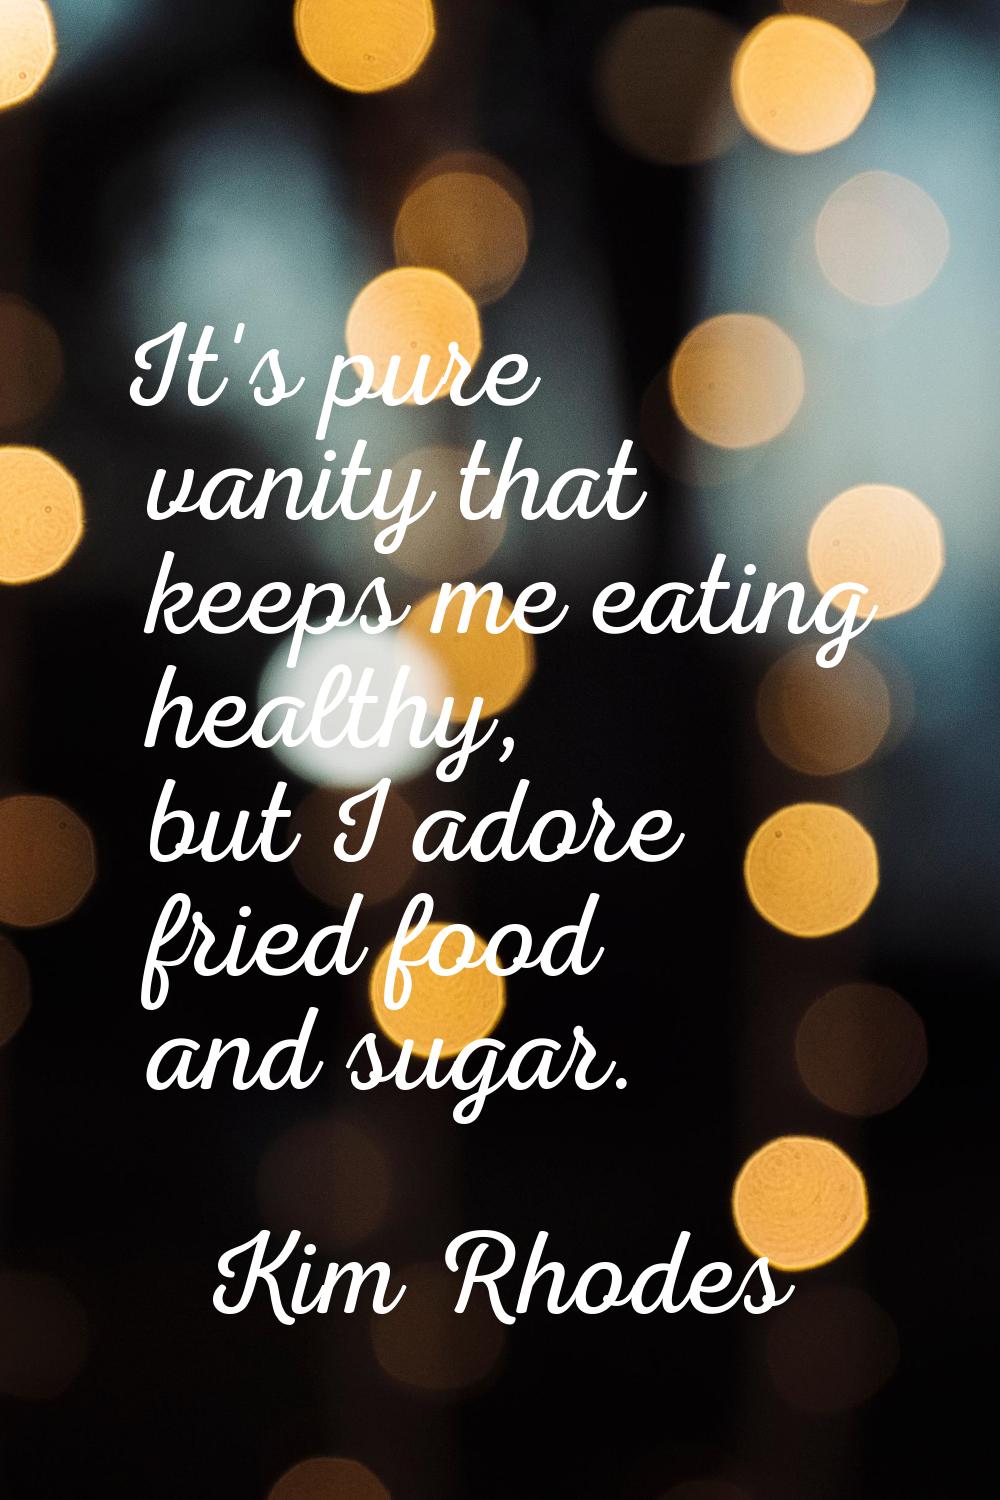 It's pure vanity that keeps me eating healthy, but I adore fried food and sugar.